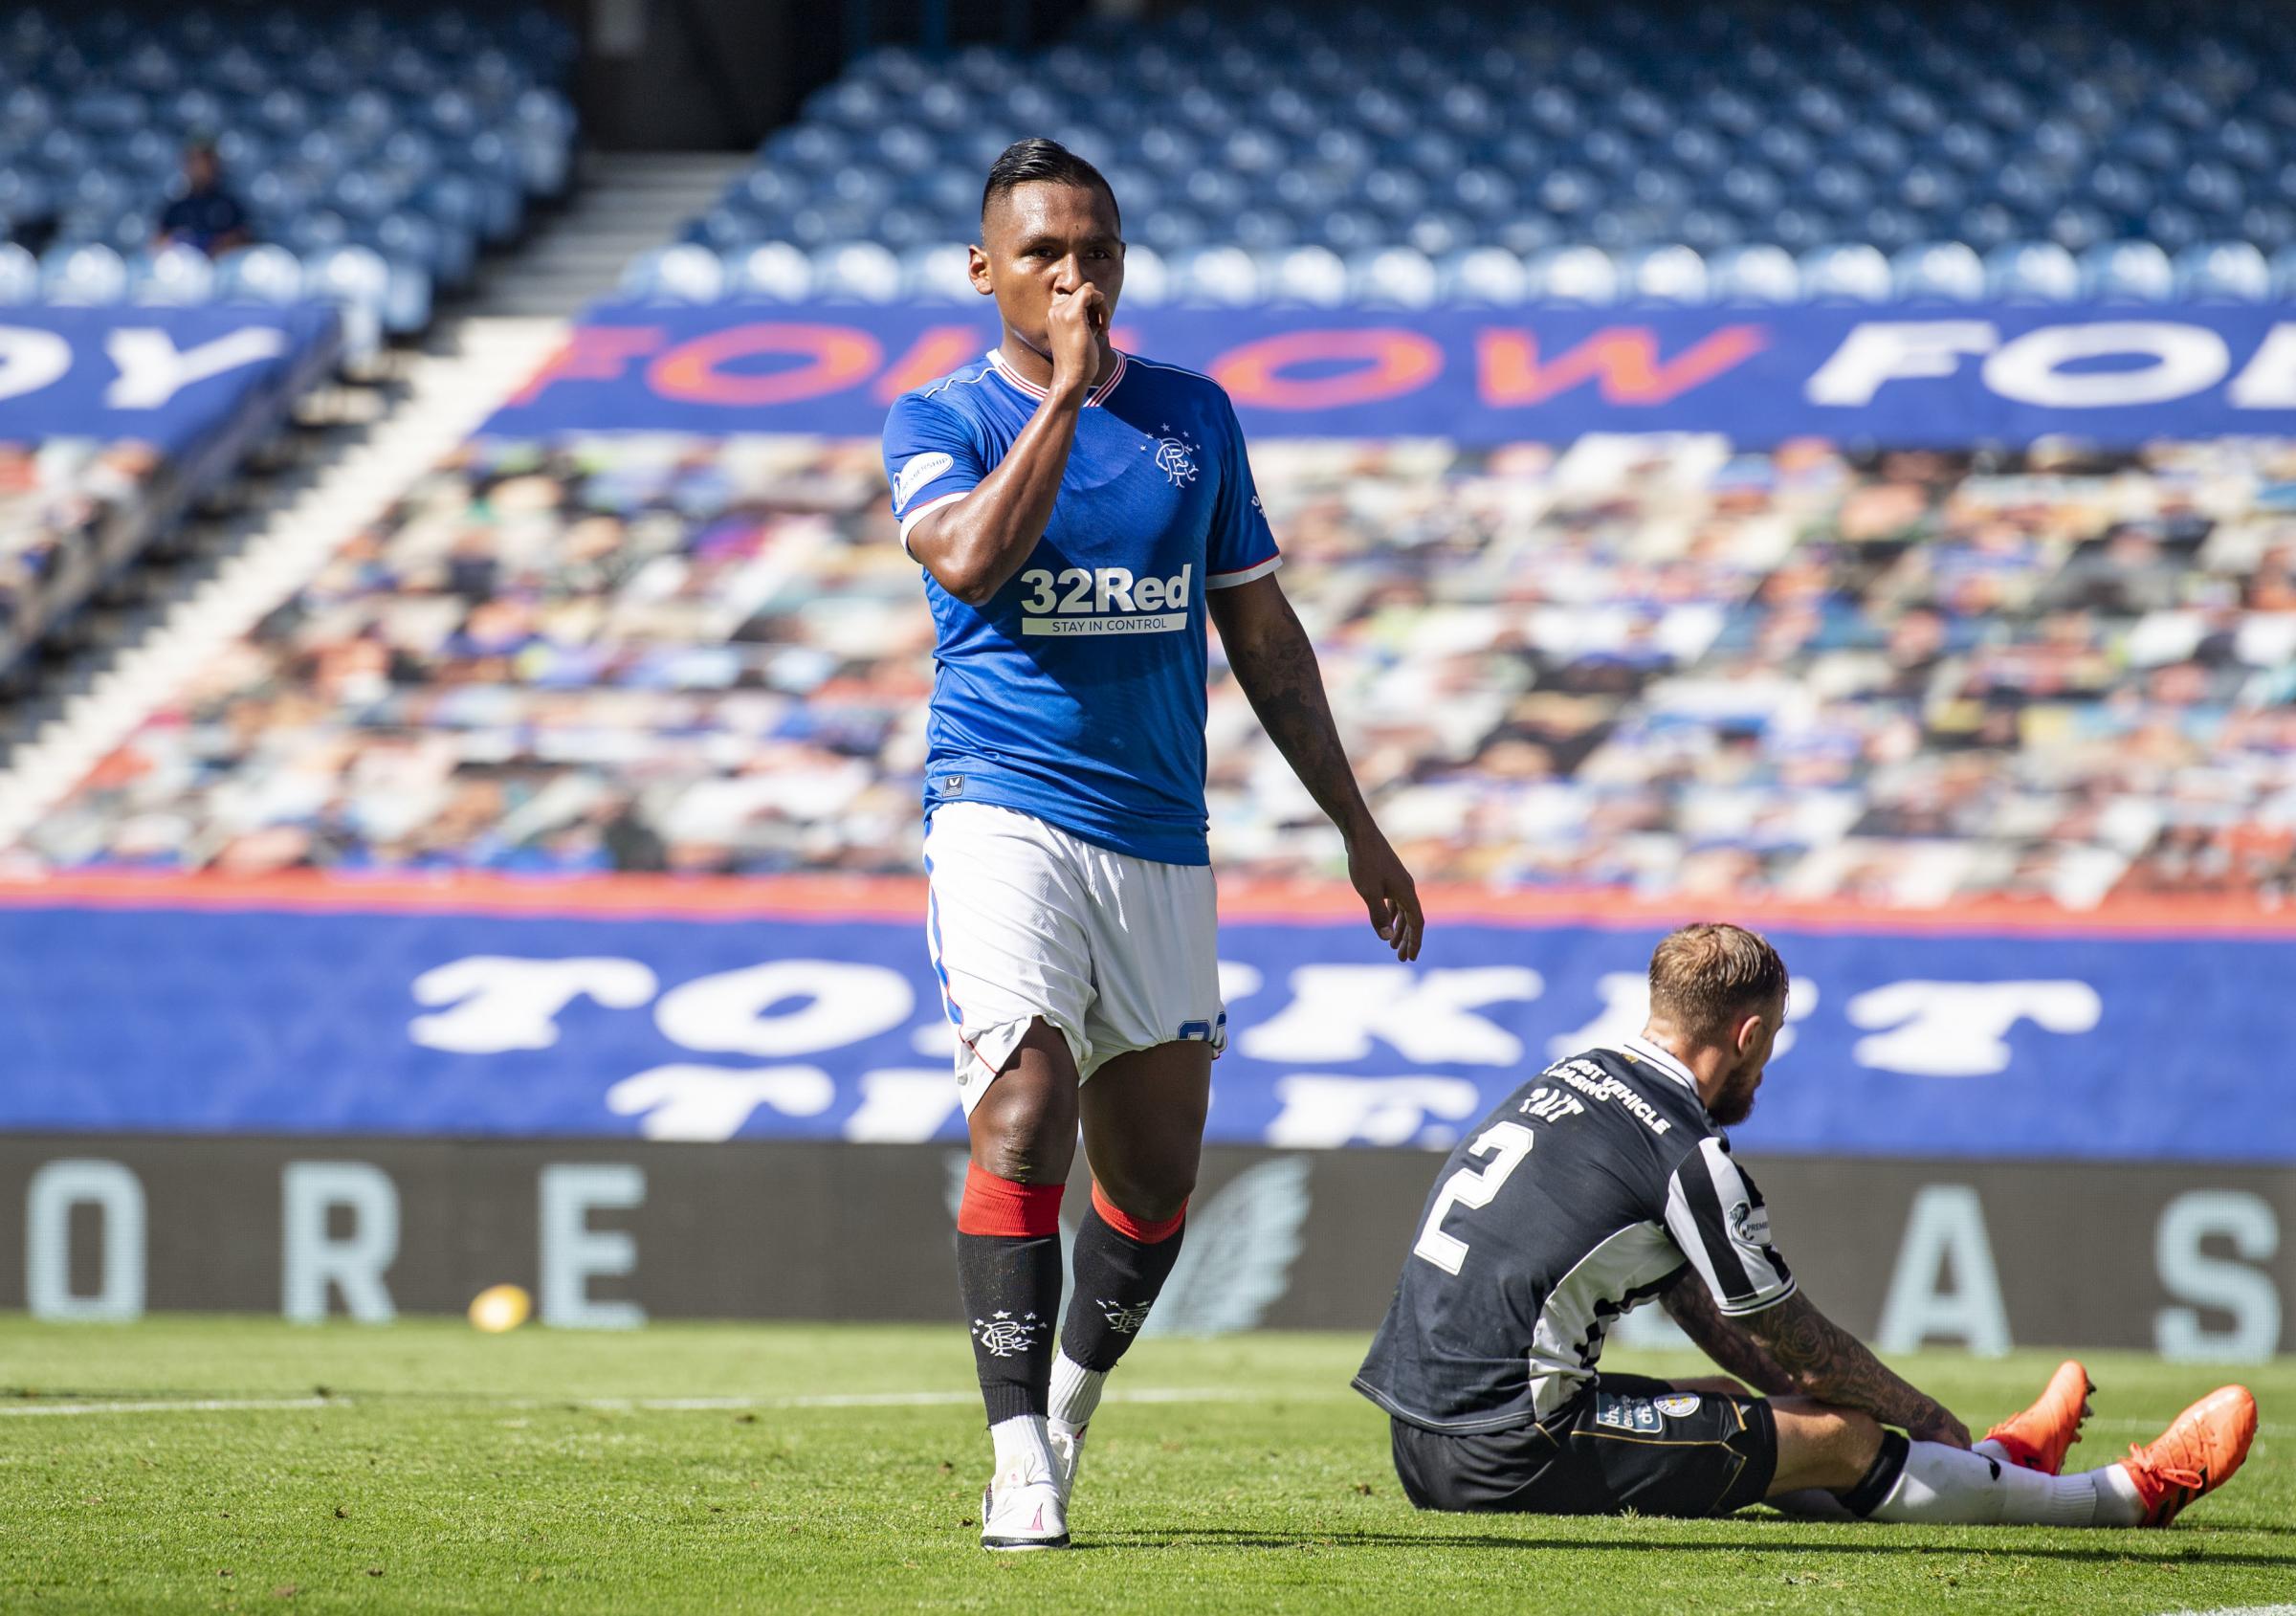 Rangers 0-0 Kilmarnock as it happens: No Morelos in squad as Roofe starts